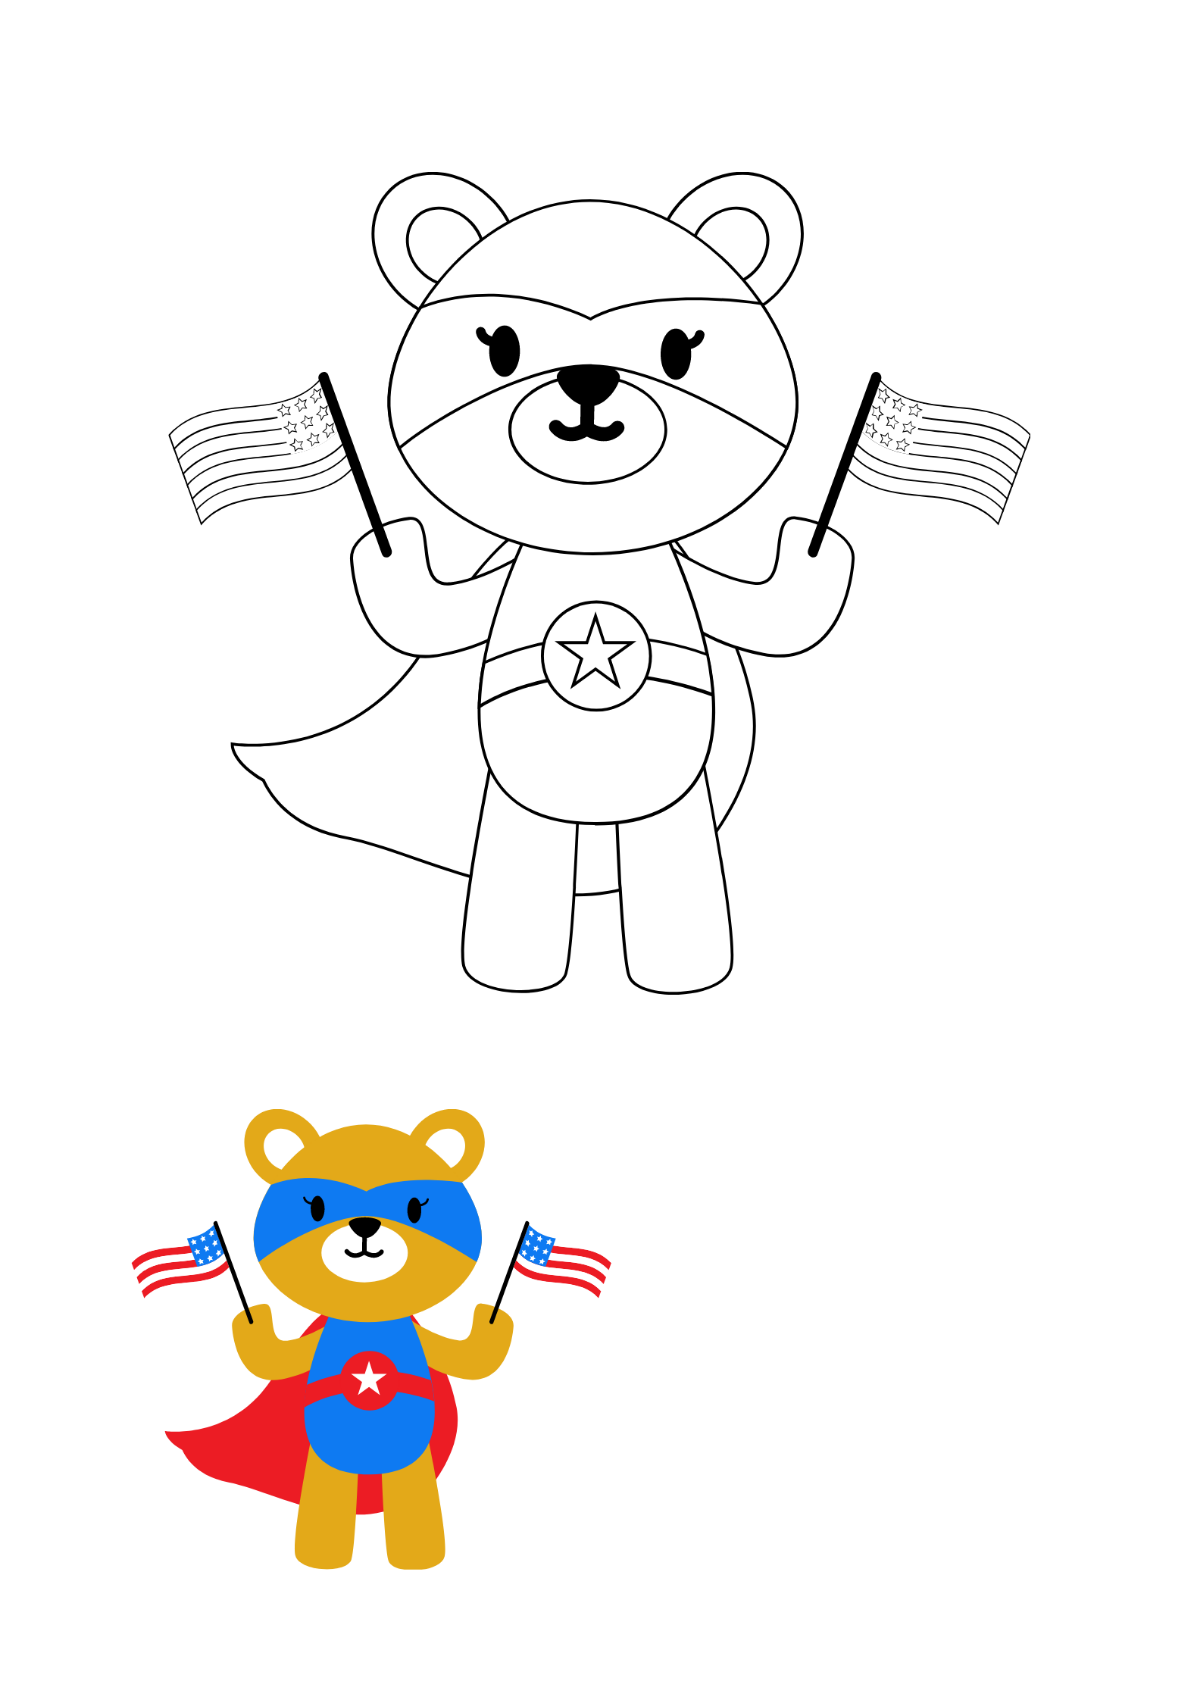 Free th of july coloring page s examples